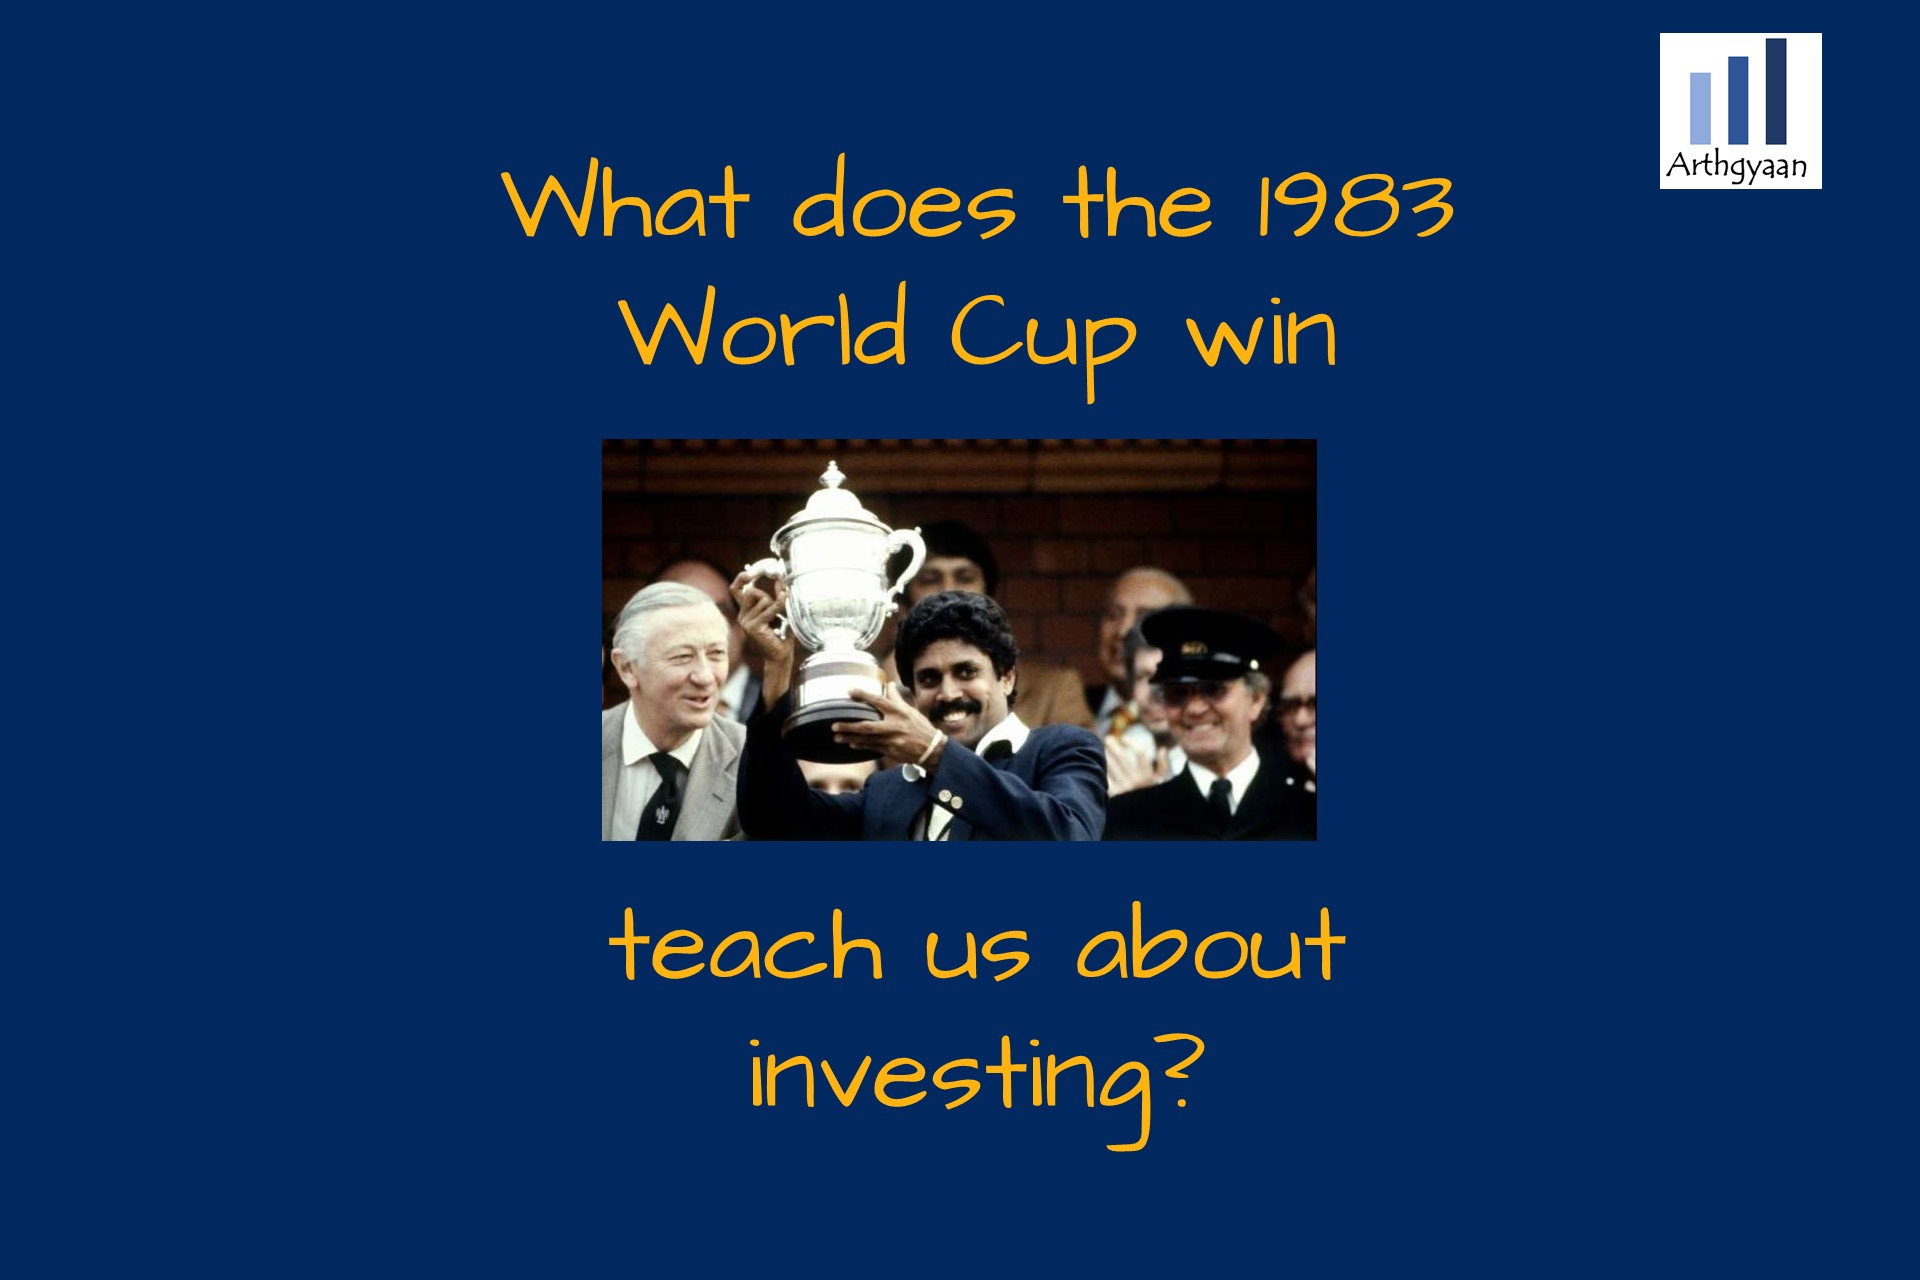 <p>A guide to both new and seasoned investors for choosing suitable investments for their portfolio in the same way selectors choose a World Cup winning team.</p>

